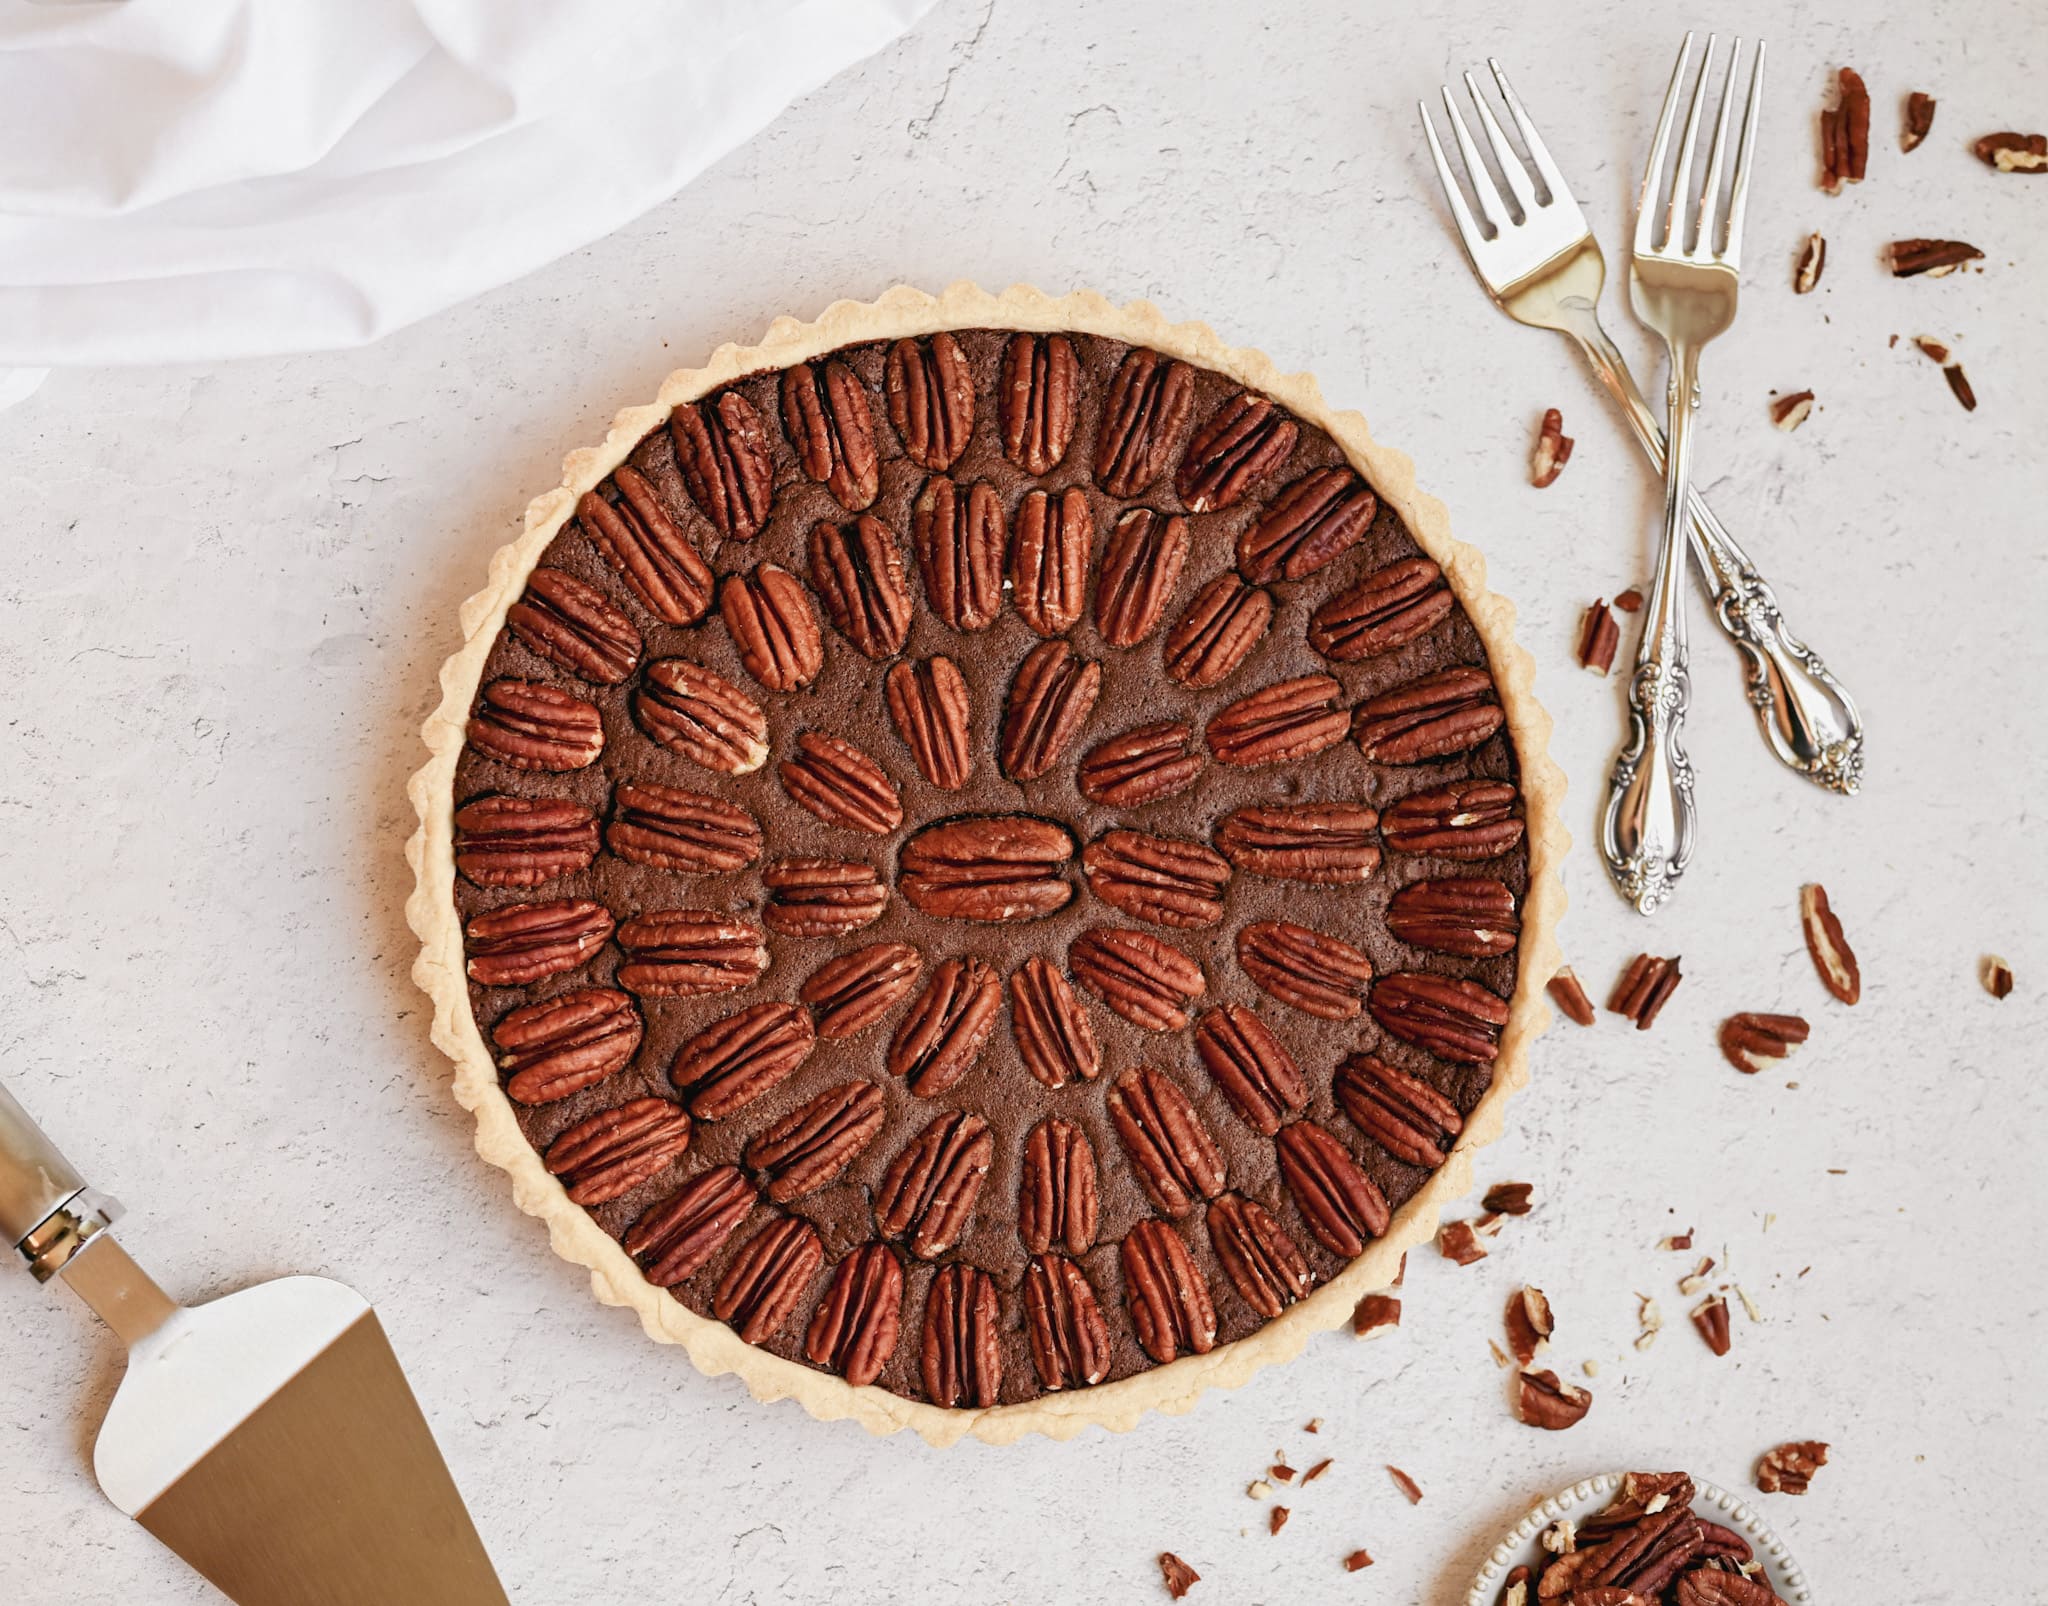 whole chocolate pecan tart shot from an aerial view, chopped pecans can be seen around the tart and white silverware